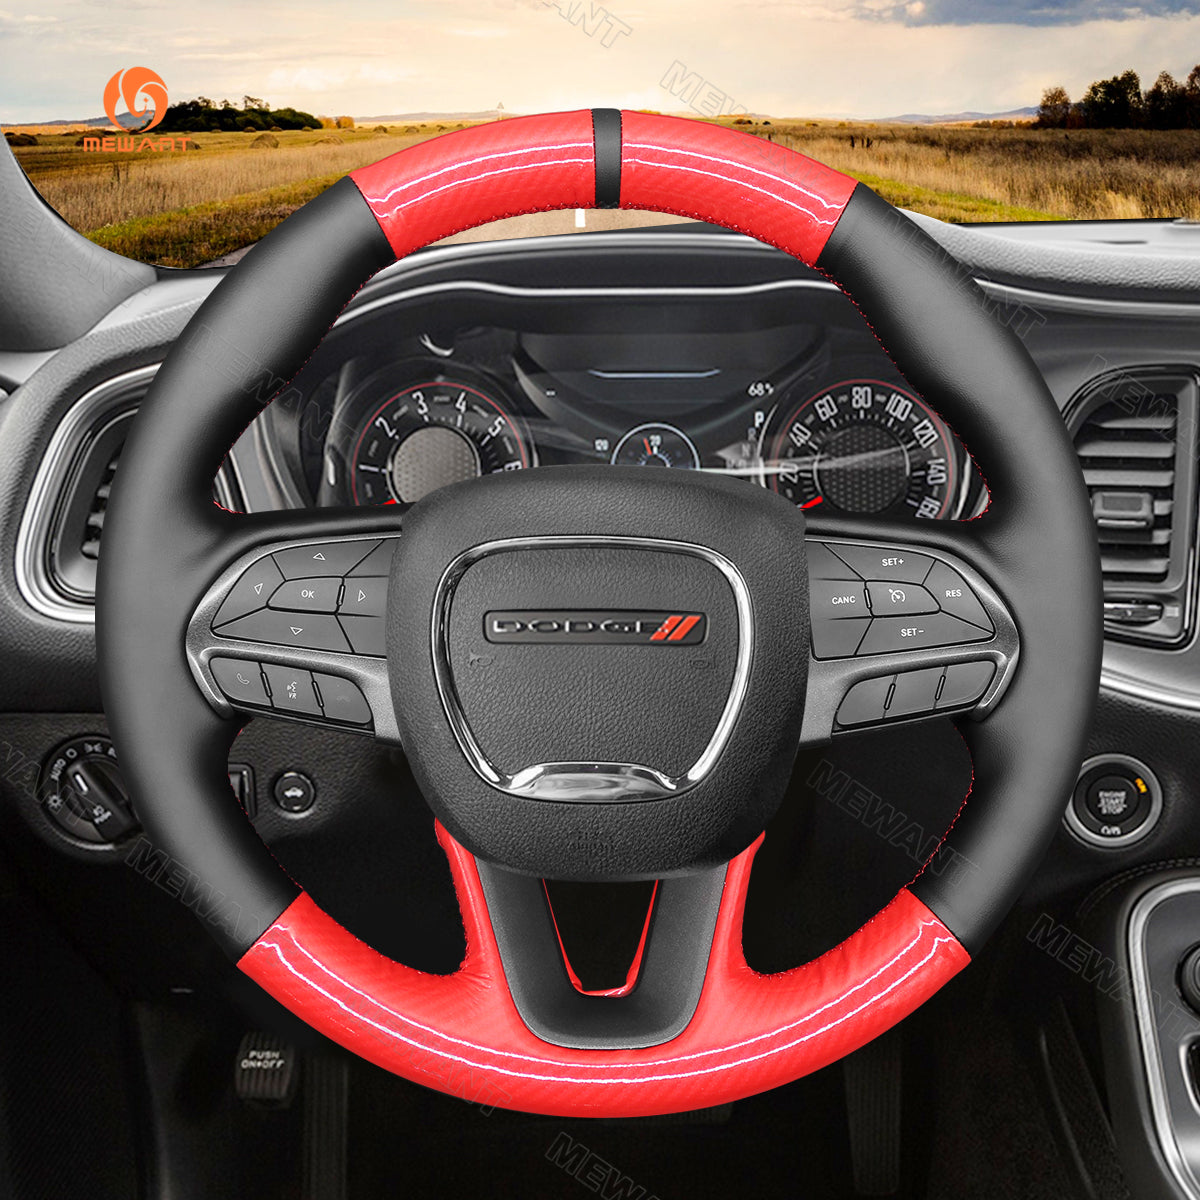 MEWANT Red Glossy Carbon Fiber Black PU Leather Car Steering Wheel Cover for Dodge Challenger Charger Durango 2018-2021